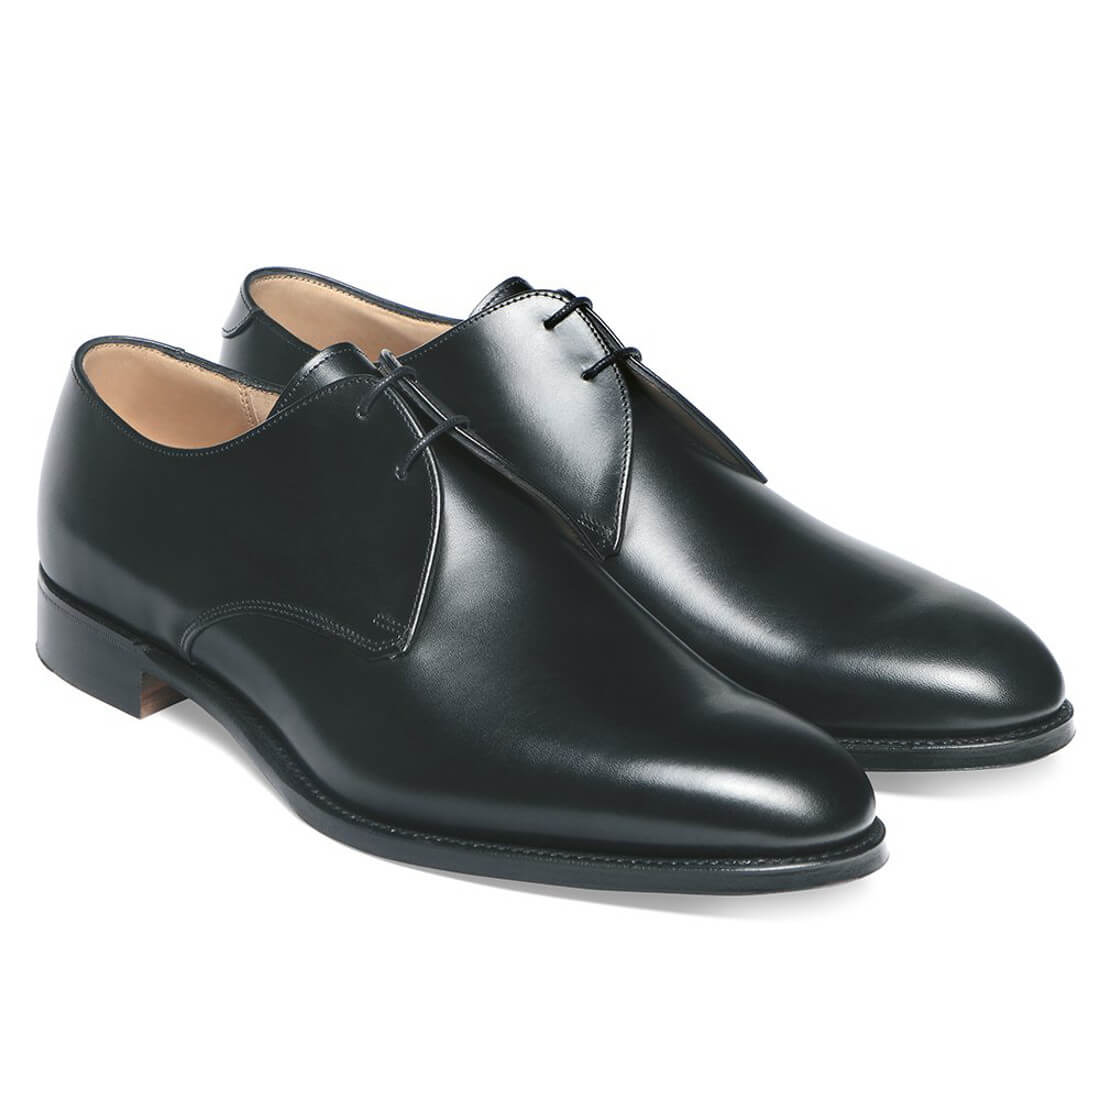 Smart, Casual, or Both? - The Derby Shoe - Ape to Gentleman